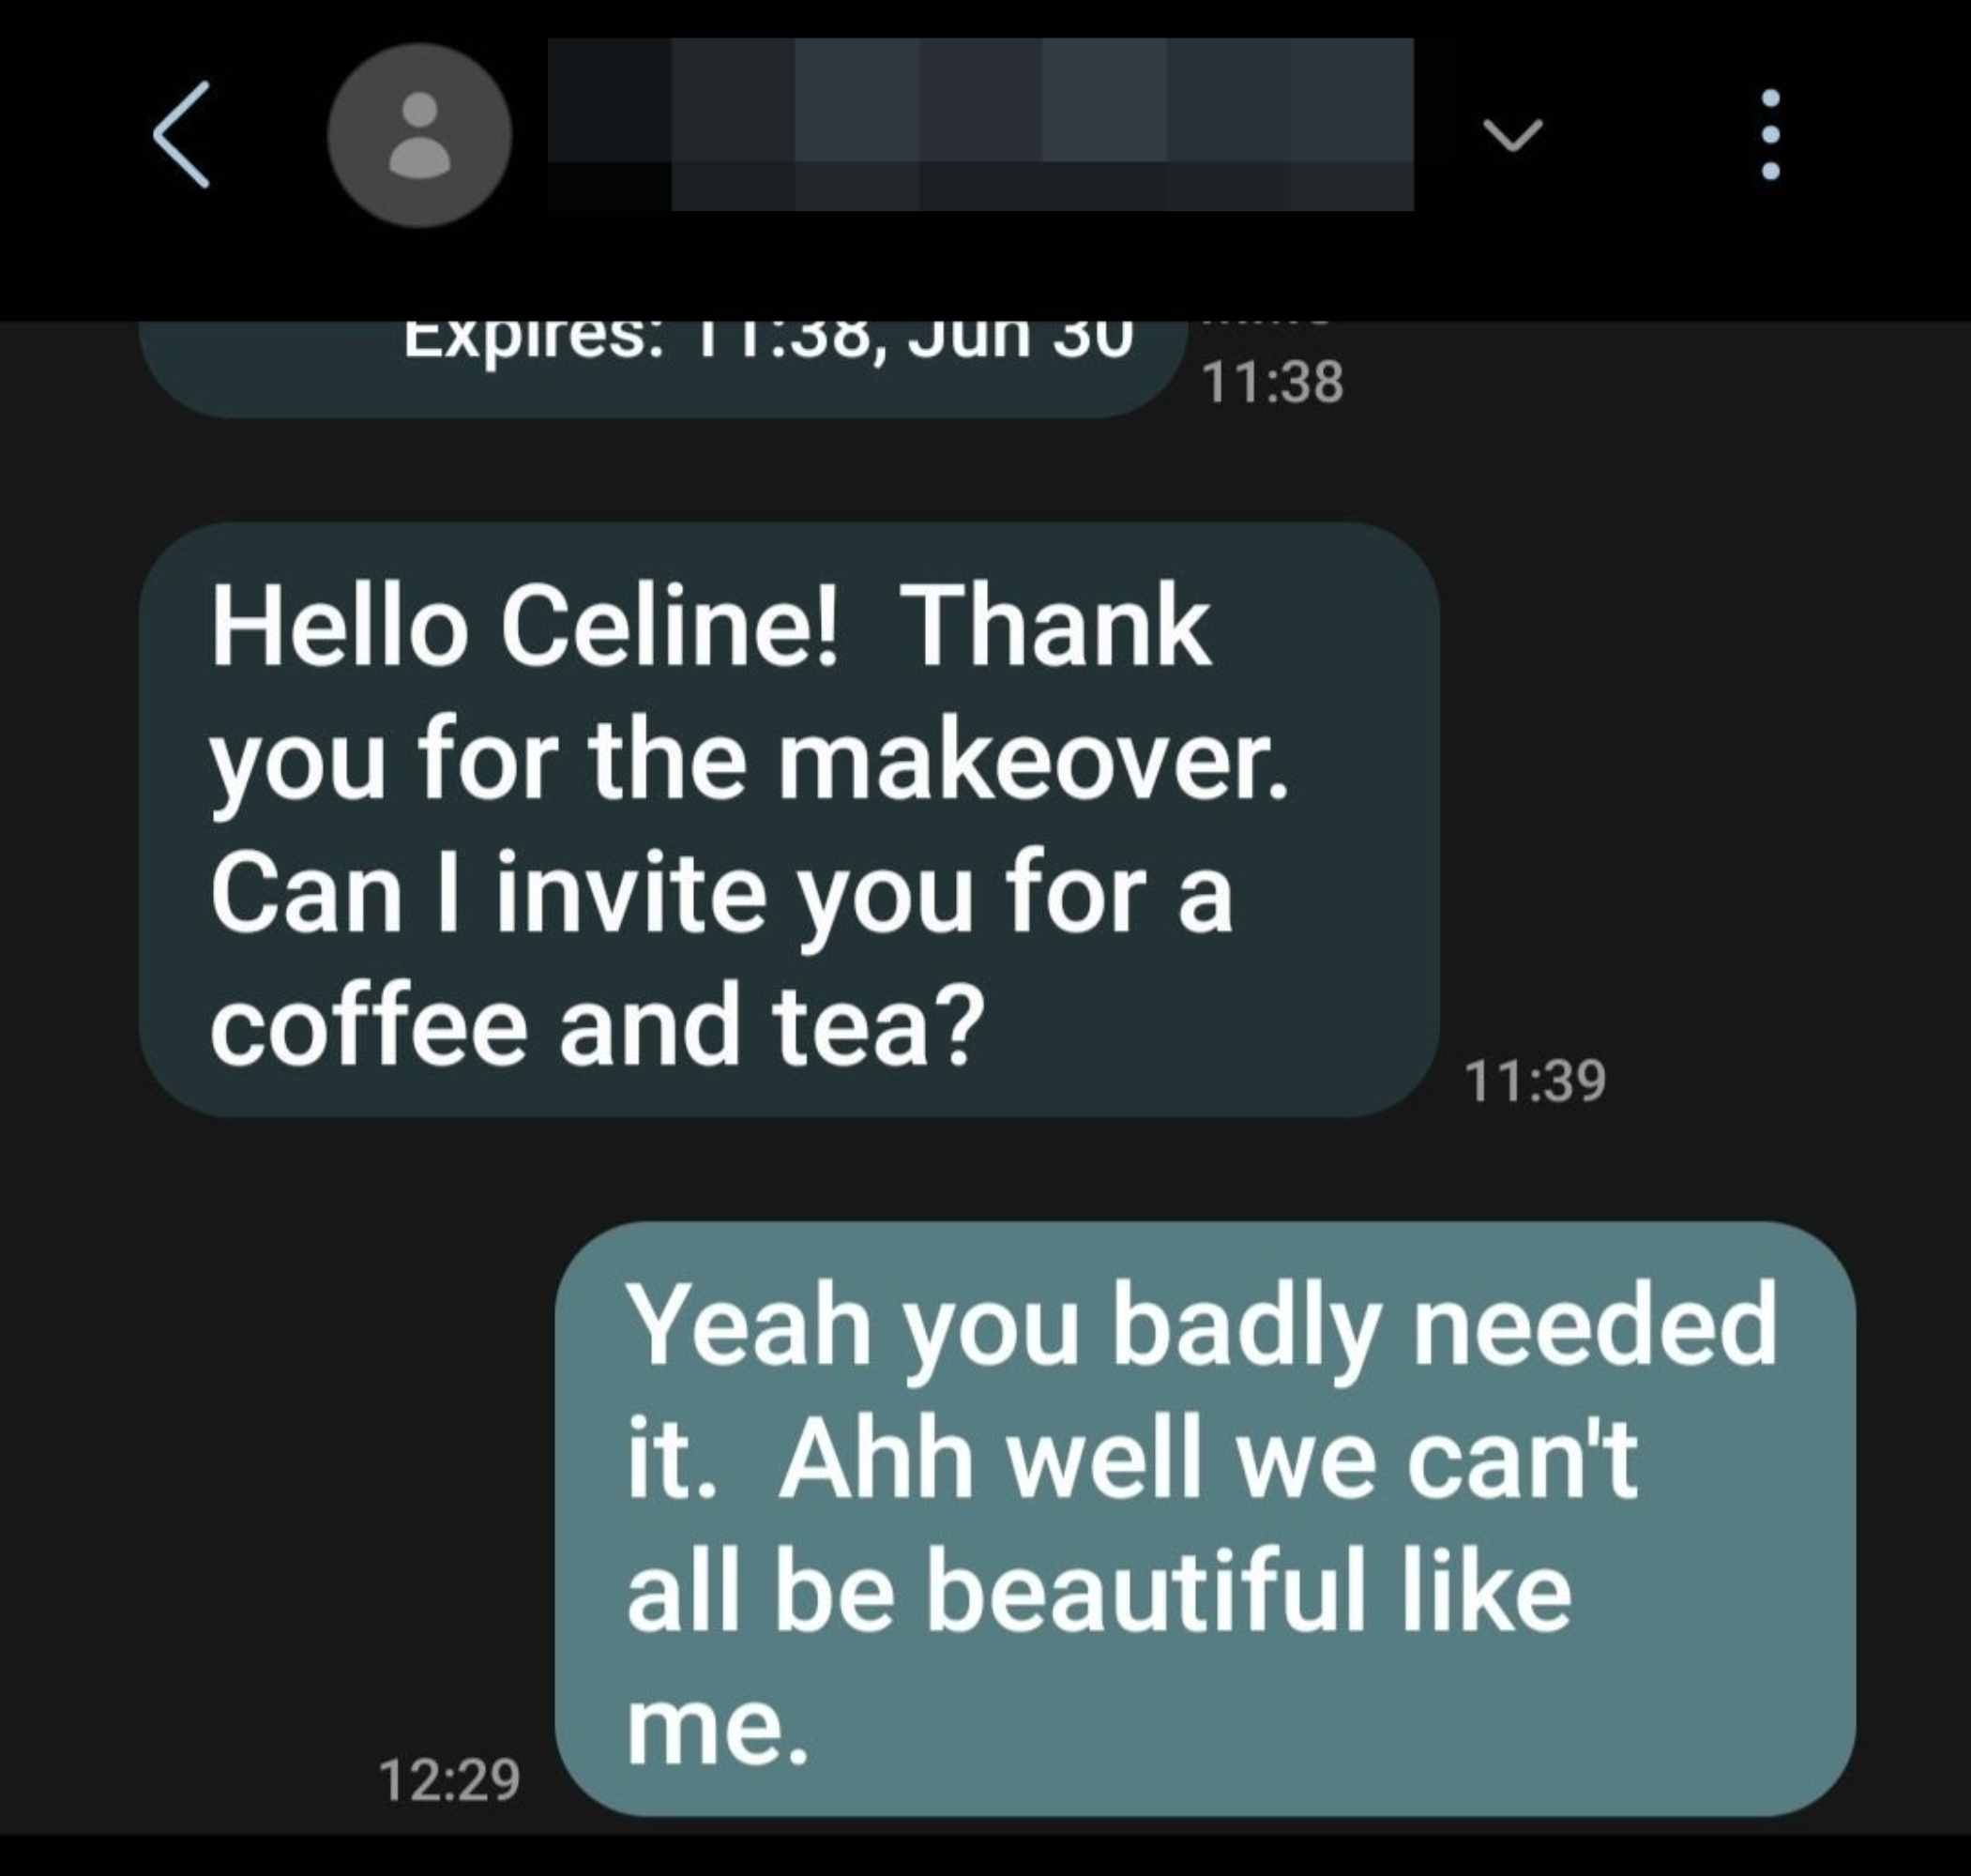 &quot;Hello Celine! Thank you for the makeover; can I invite you for a coffee and tea?&quot; &quot;Yeah you badly needed it; ahh well we can&#x27;t all be beautiful like me&quot;